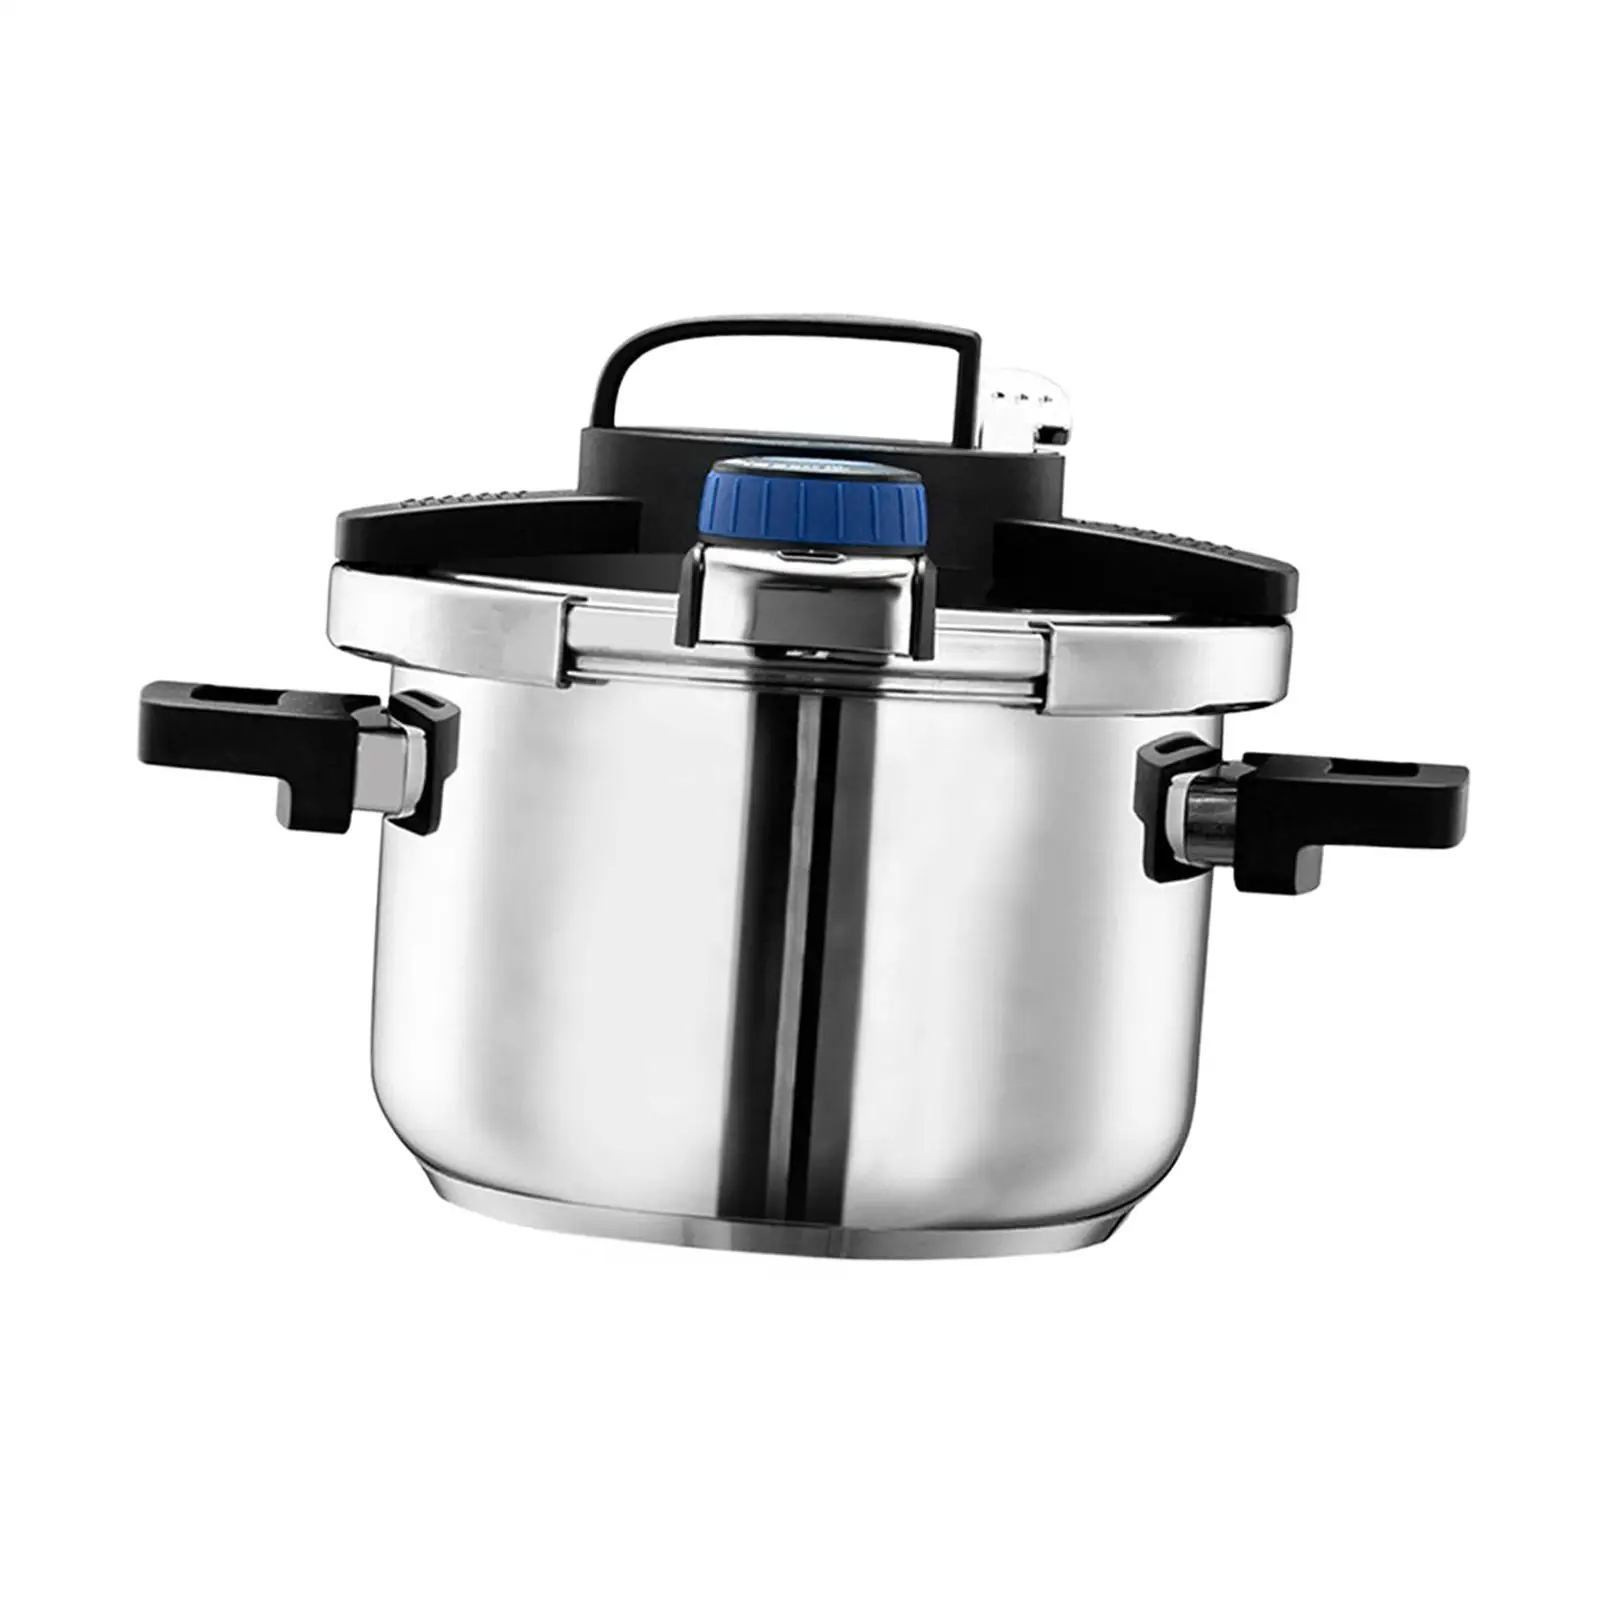 

Stovetop Pressure Cooker Kitchen Soup Stewpot Stovetop Pressure Cooker Cookware for 4-6 People Commercial Kitchen Camping Home